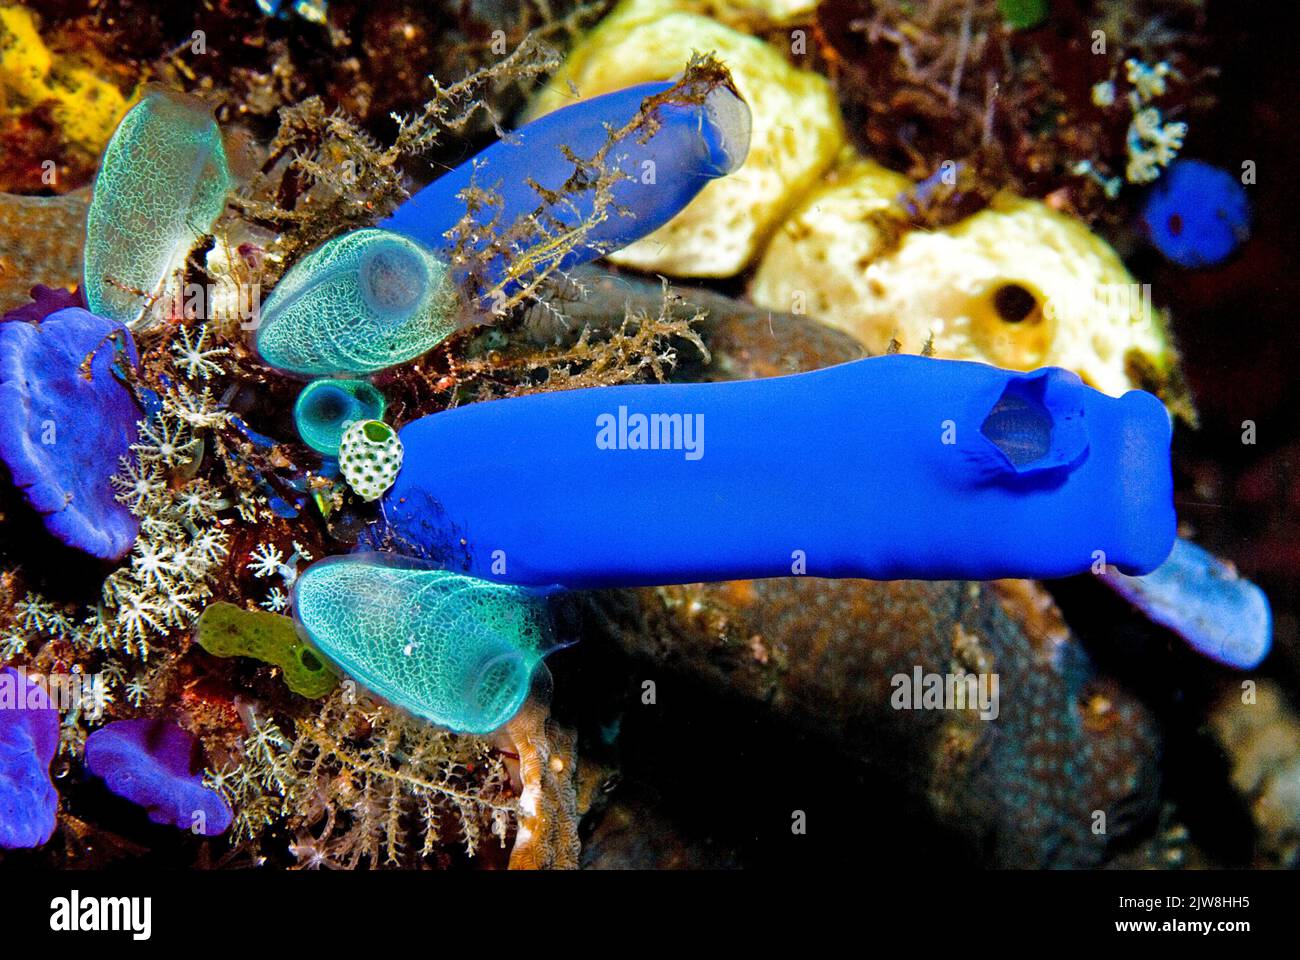 Blue sea squirt (Rhopalaea sp.), sea squirt colony in a coral reef, Thailand, Andaman Sea, Asia Stock Photo